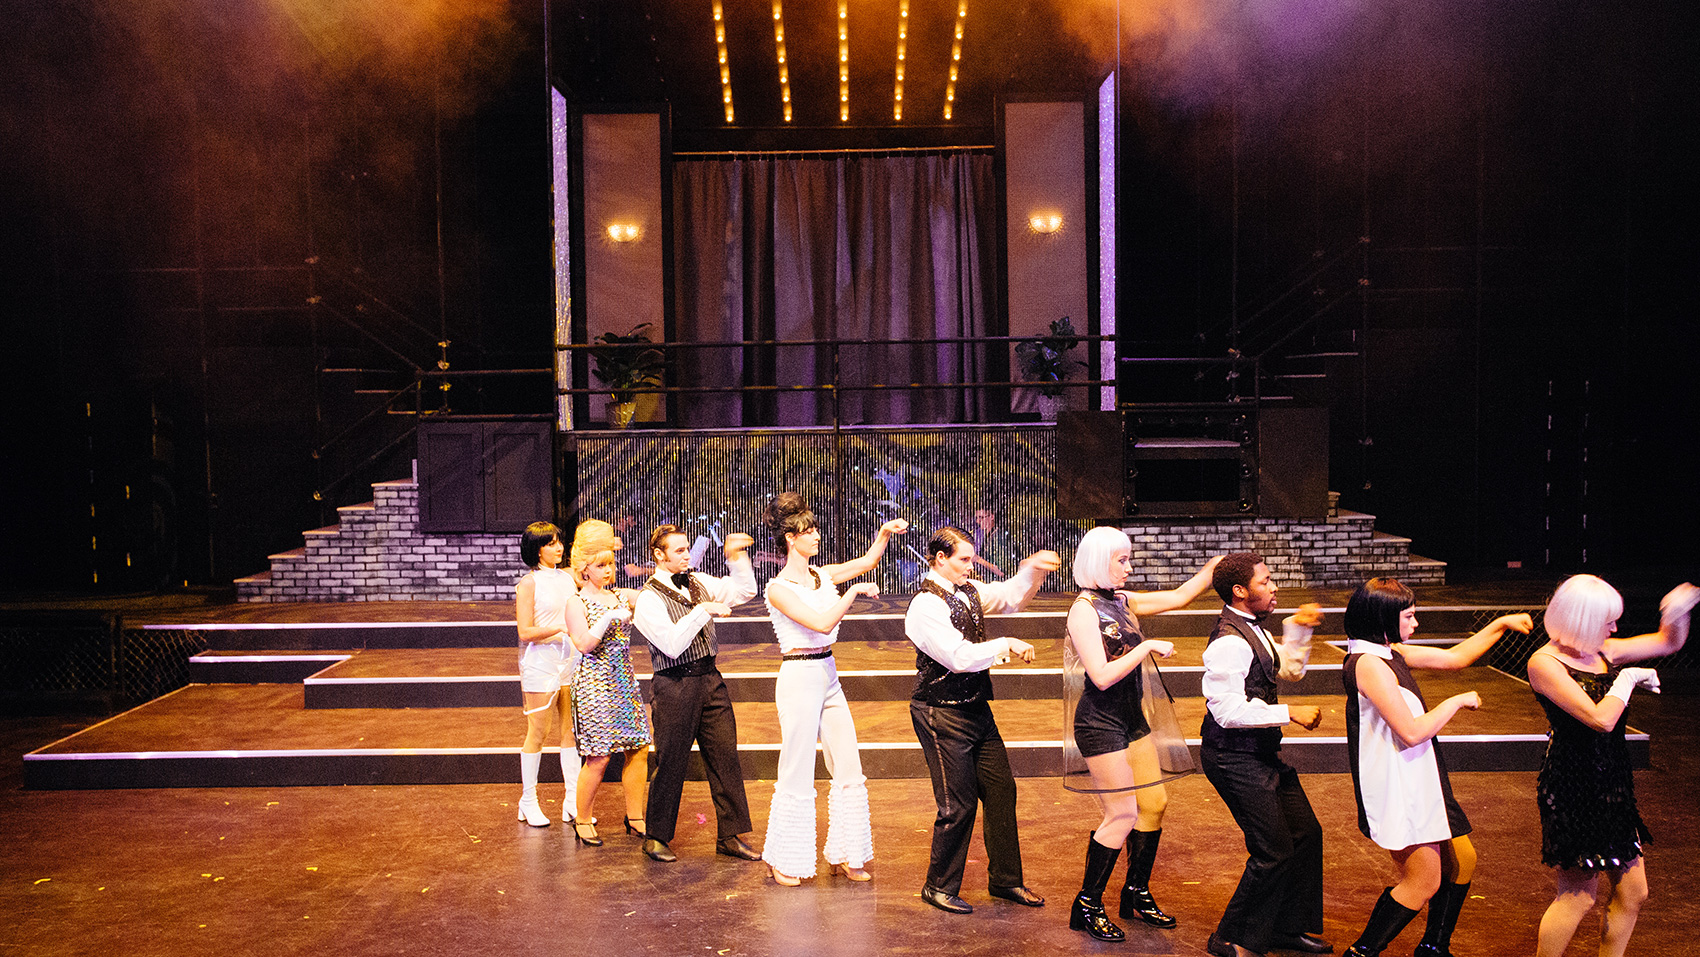 A group of performers, male and female, dance in a single line. Behind them stands a raised platform designed to look like the entrance to a fancy and glitzy retro sott of hall or restaurant, with purple curtains, soft lights, and a short flight of stairs on either side of the platform.